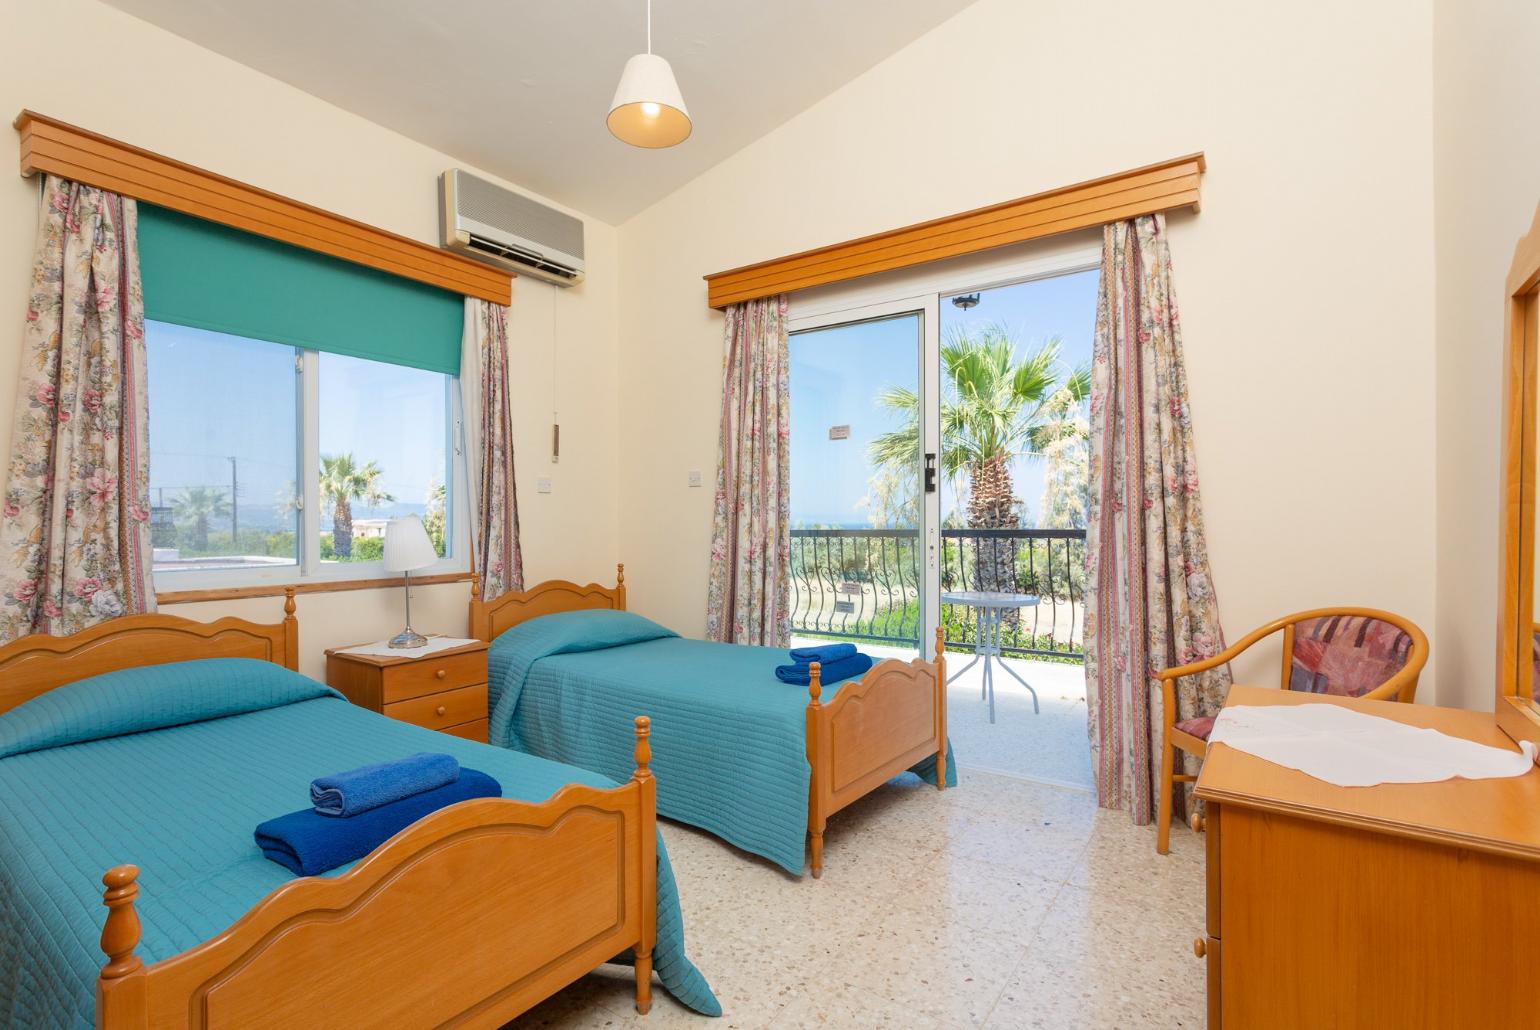 Twin bedroom with A/C, en suite bathroom, and balcony access with sea views